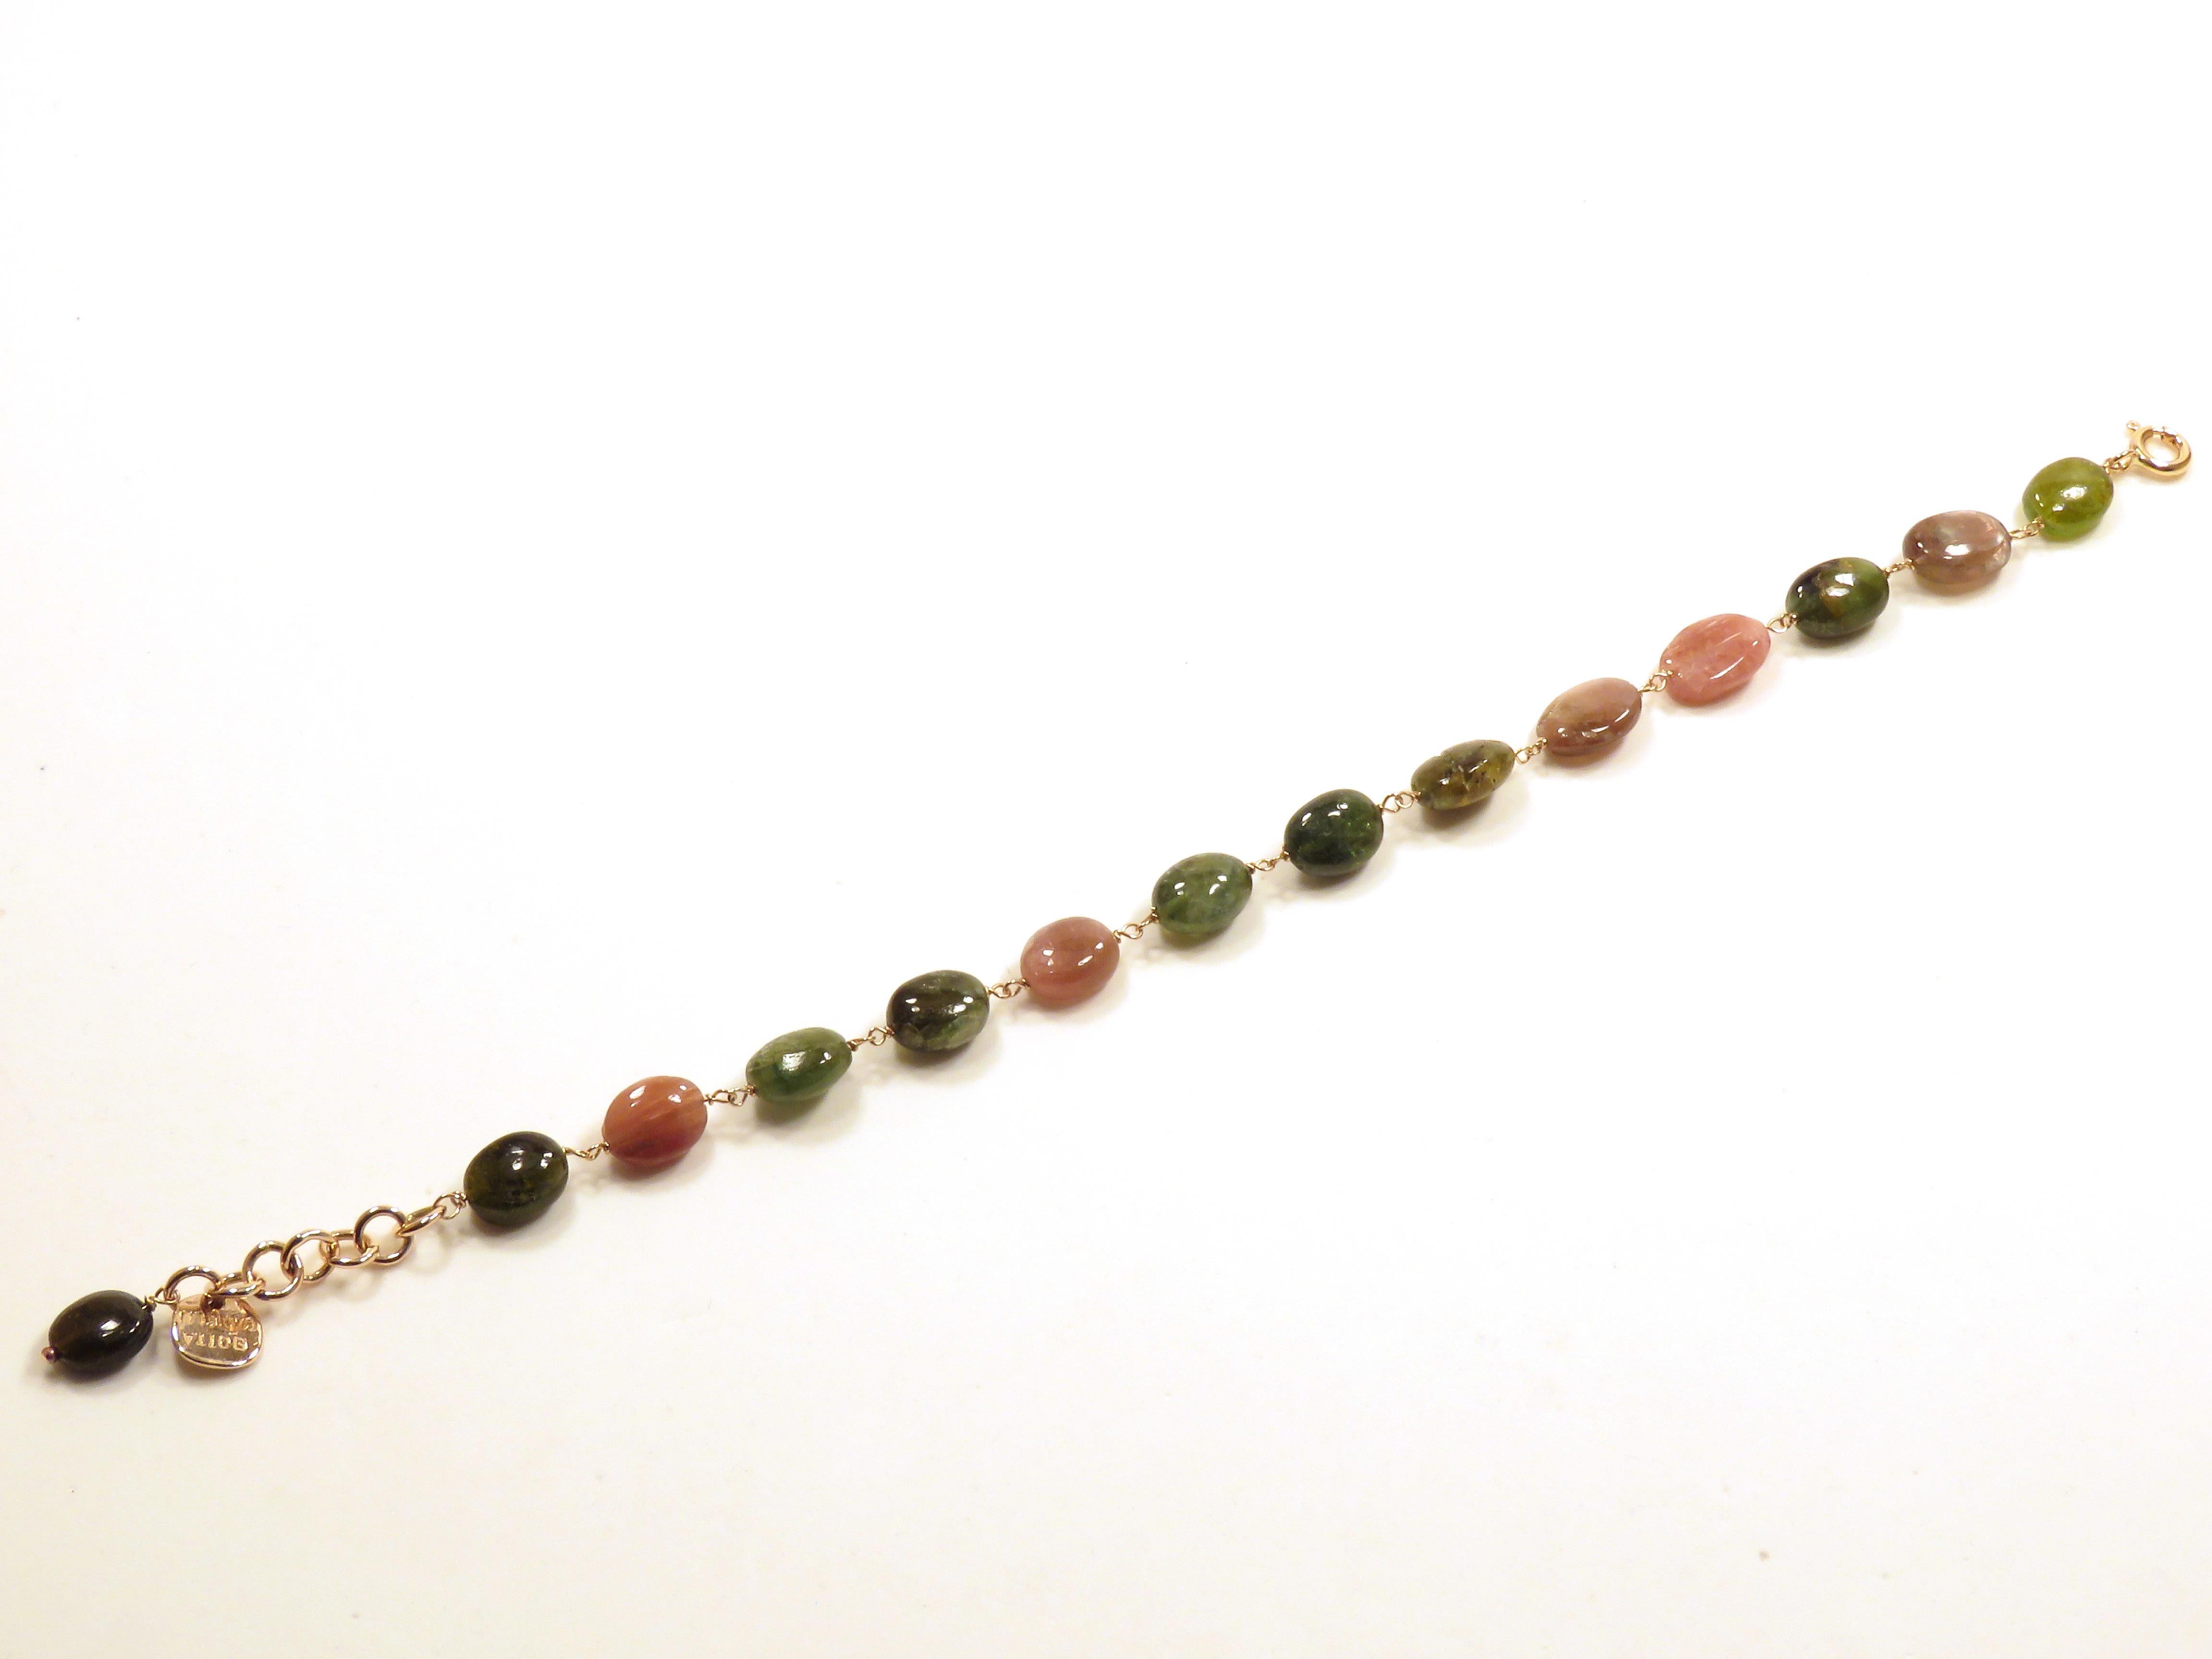 Women's or Men's Tourmaline Rose Gold Bracelet Handcrafted in Italy by Botta Gioielli